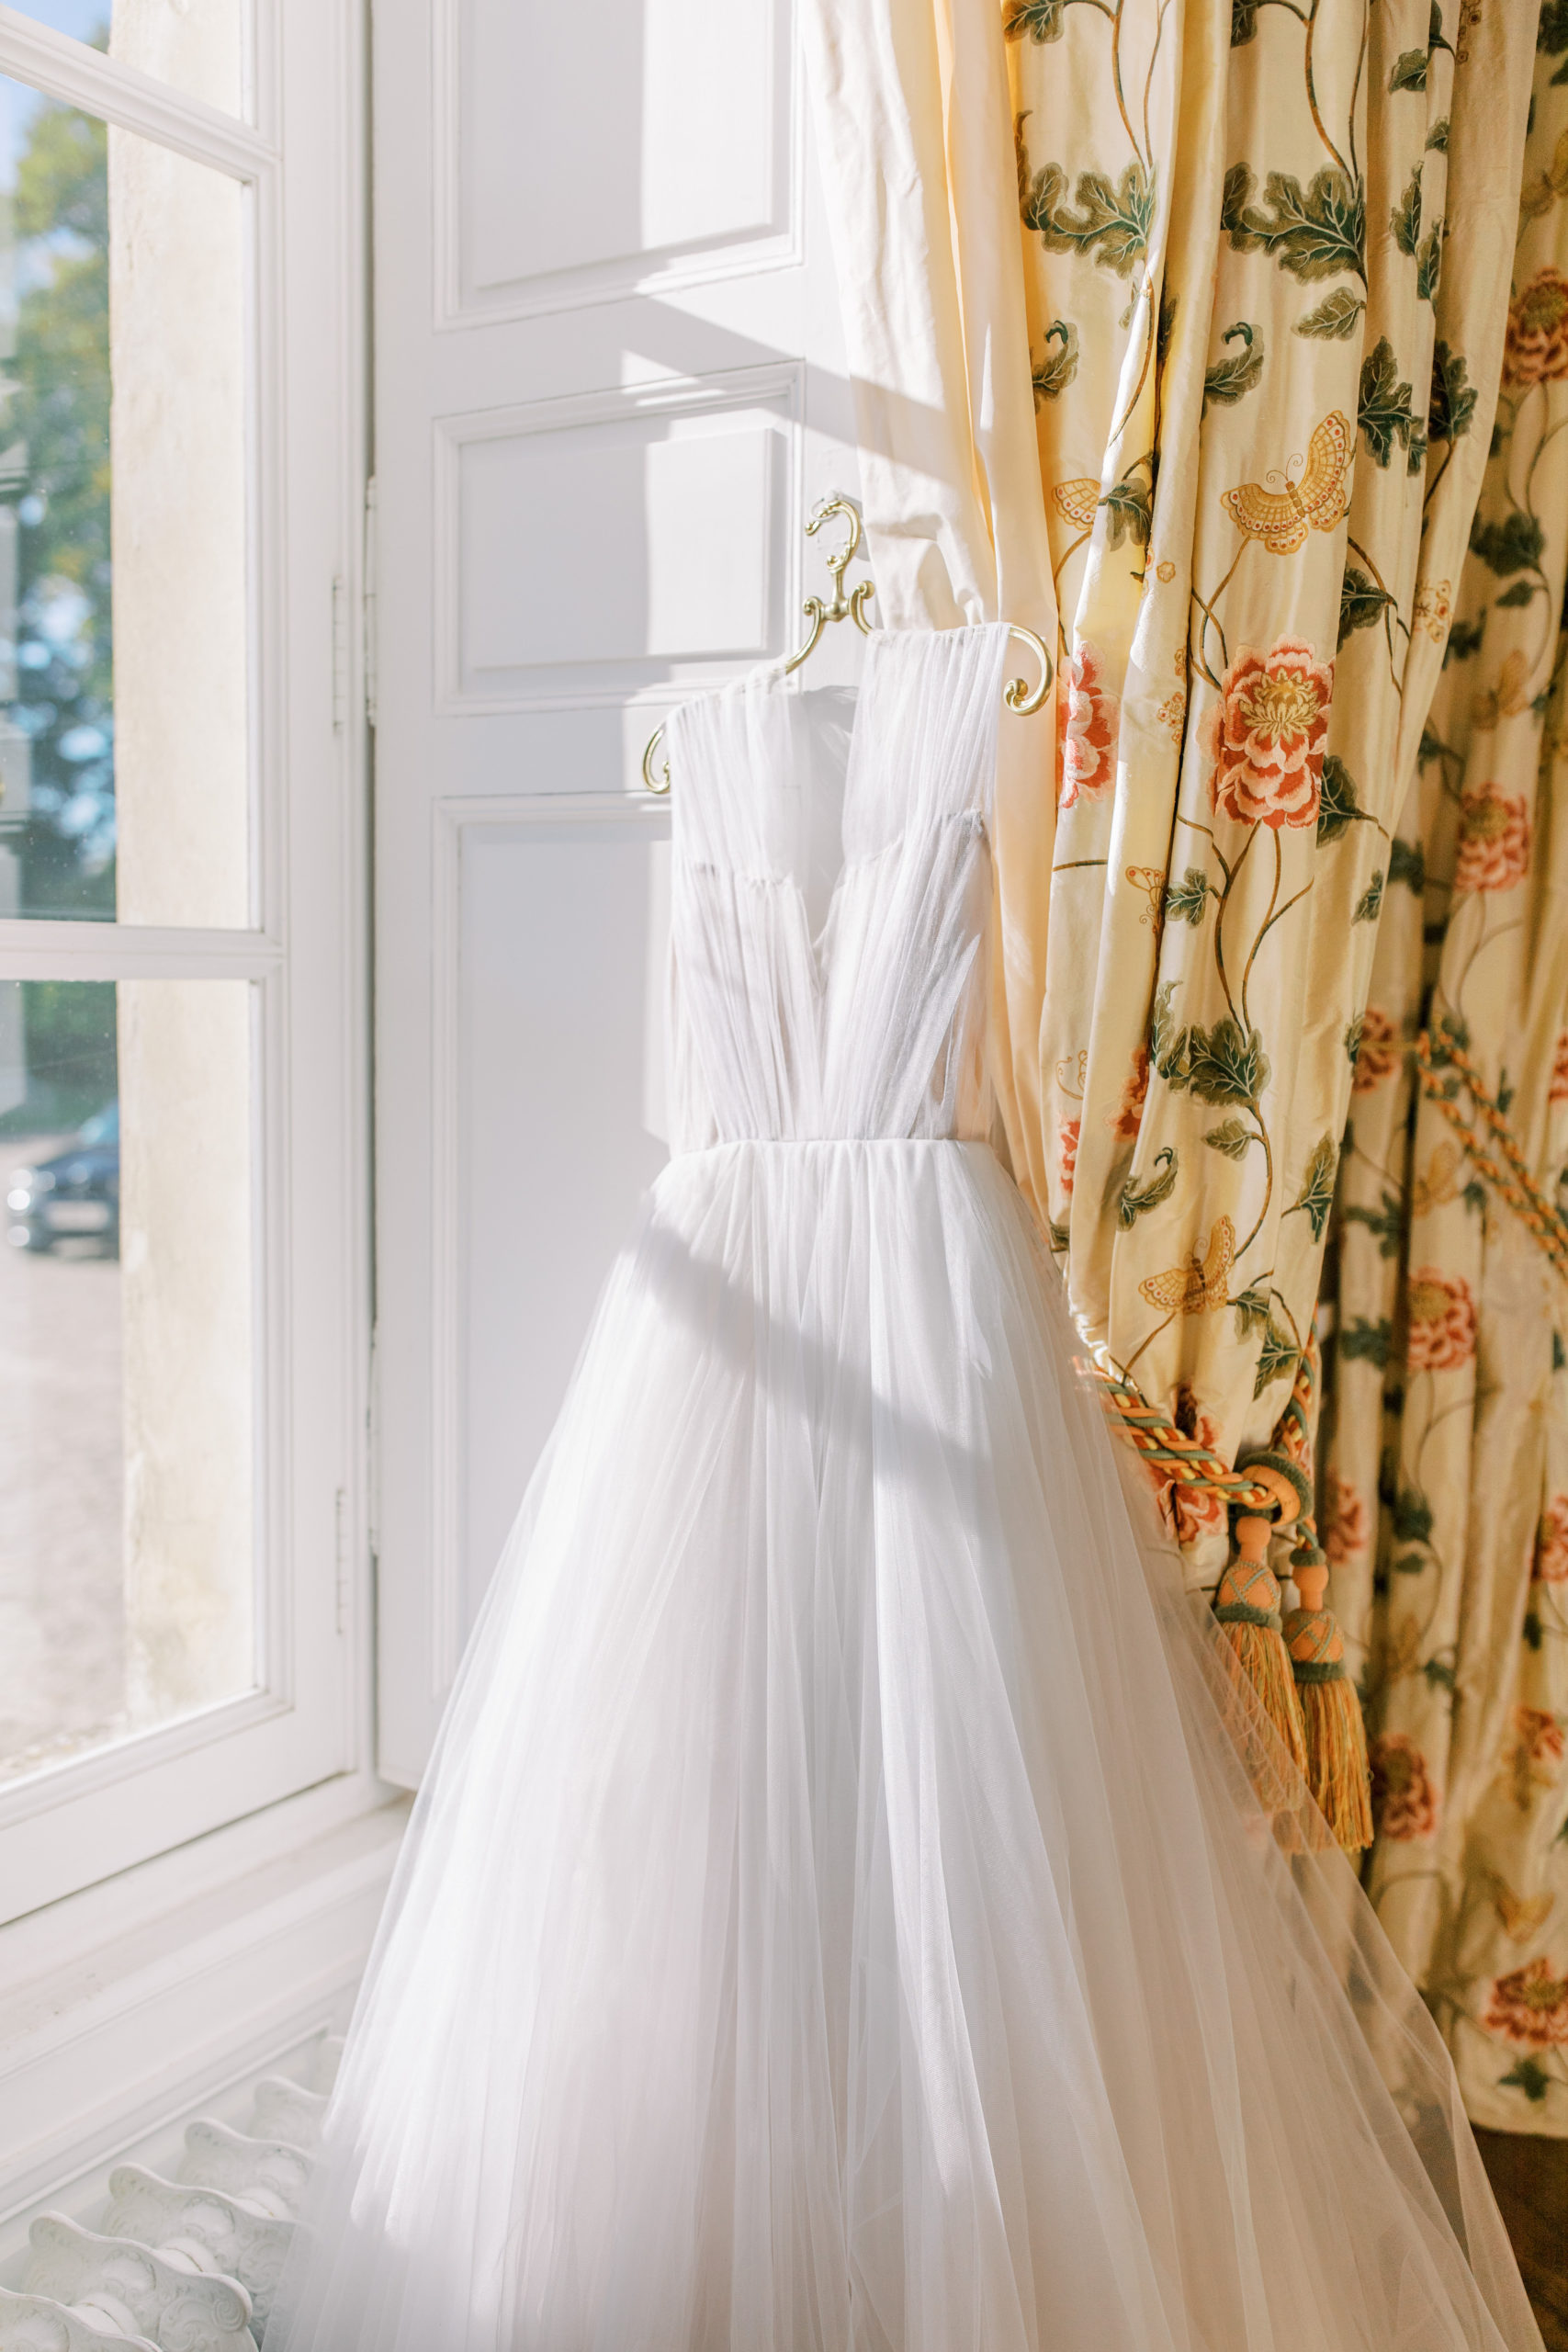 Wedding Dress hangs in the window with sunlight and gold curtains